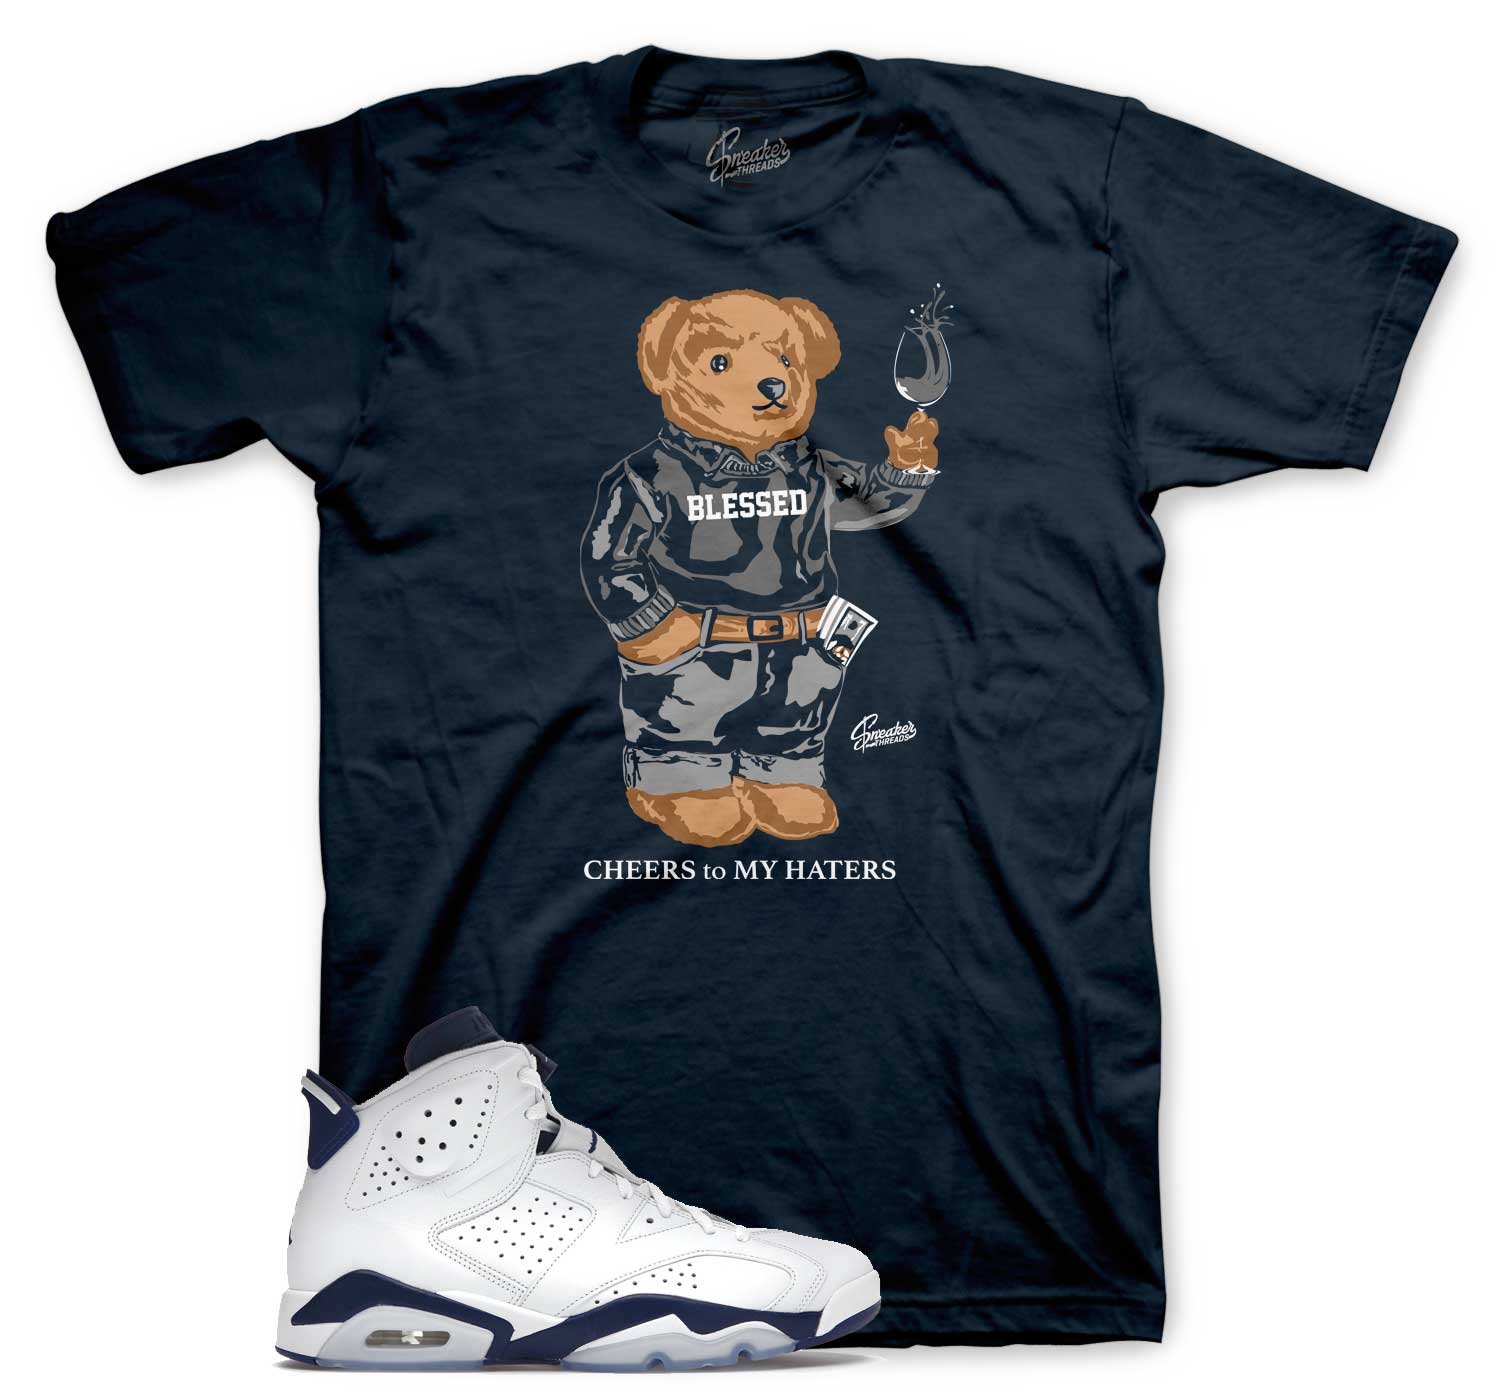 Jordan 6 midnight navy tees and outfits